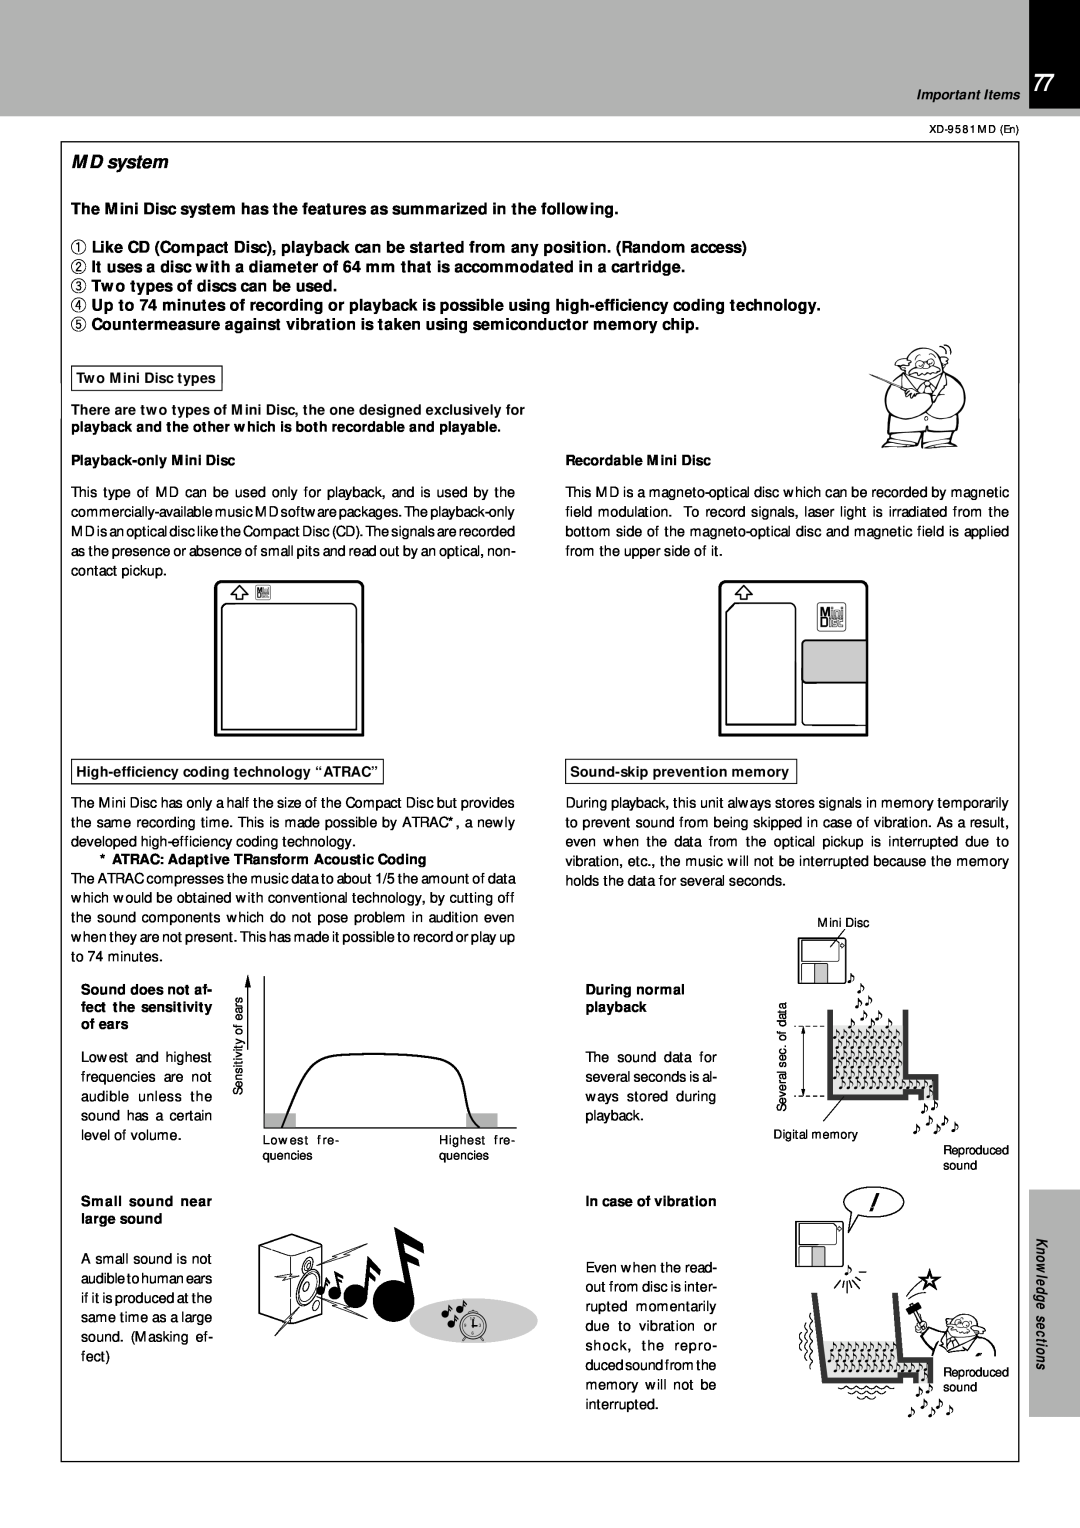 Kenwood XD-9581MD instruction manual MD system, In caseImportantof difficultyItems 